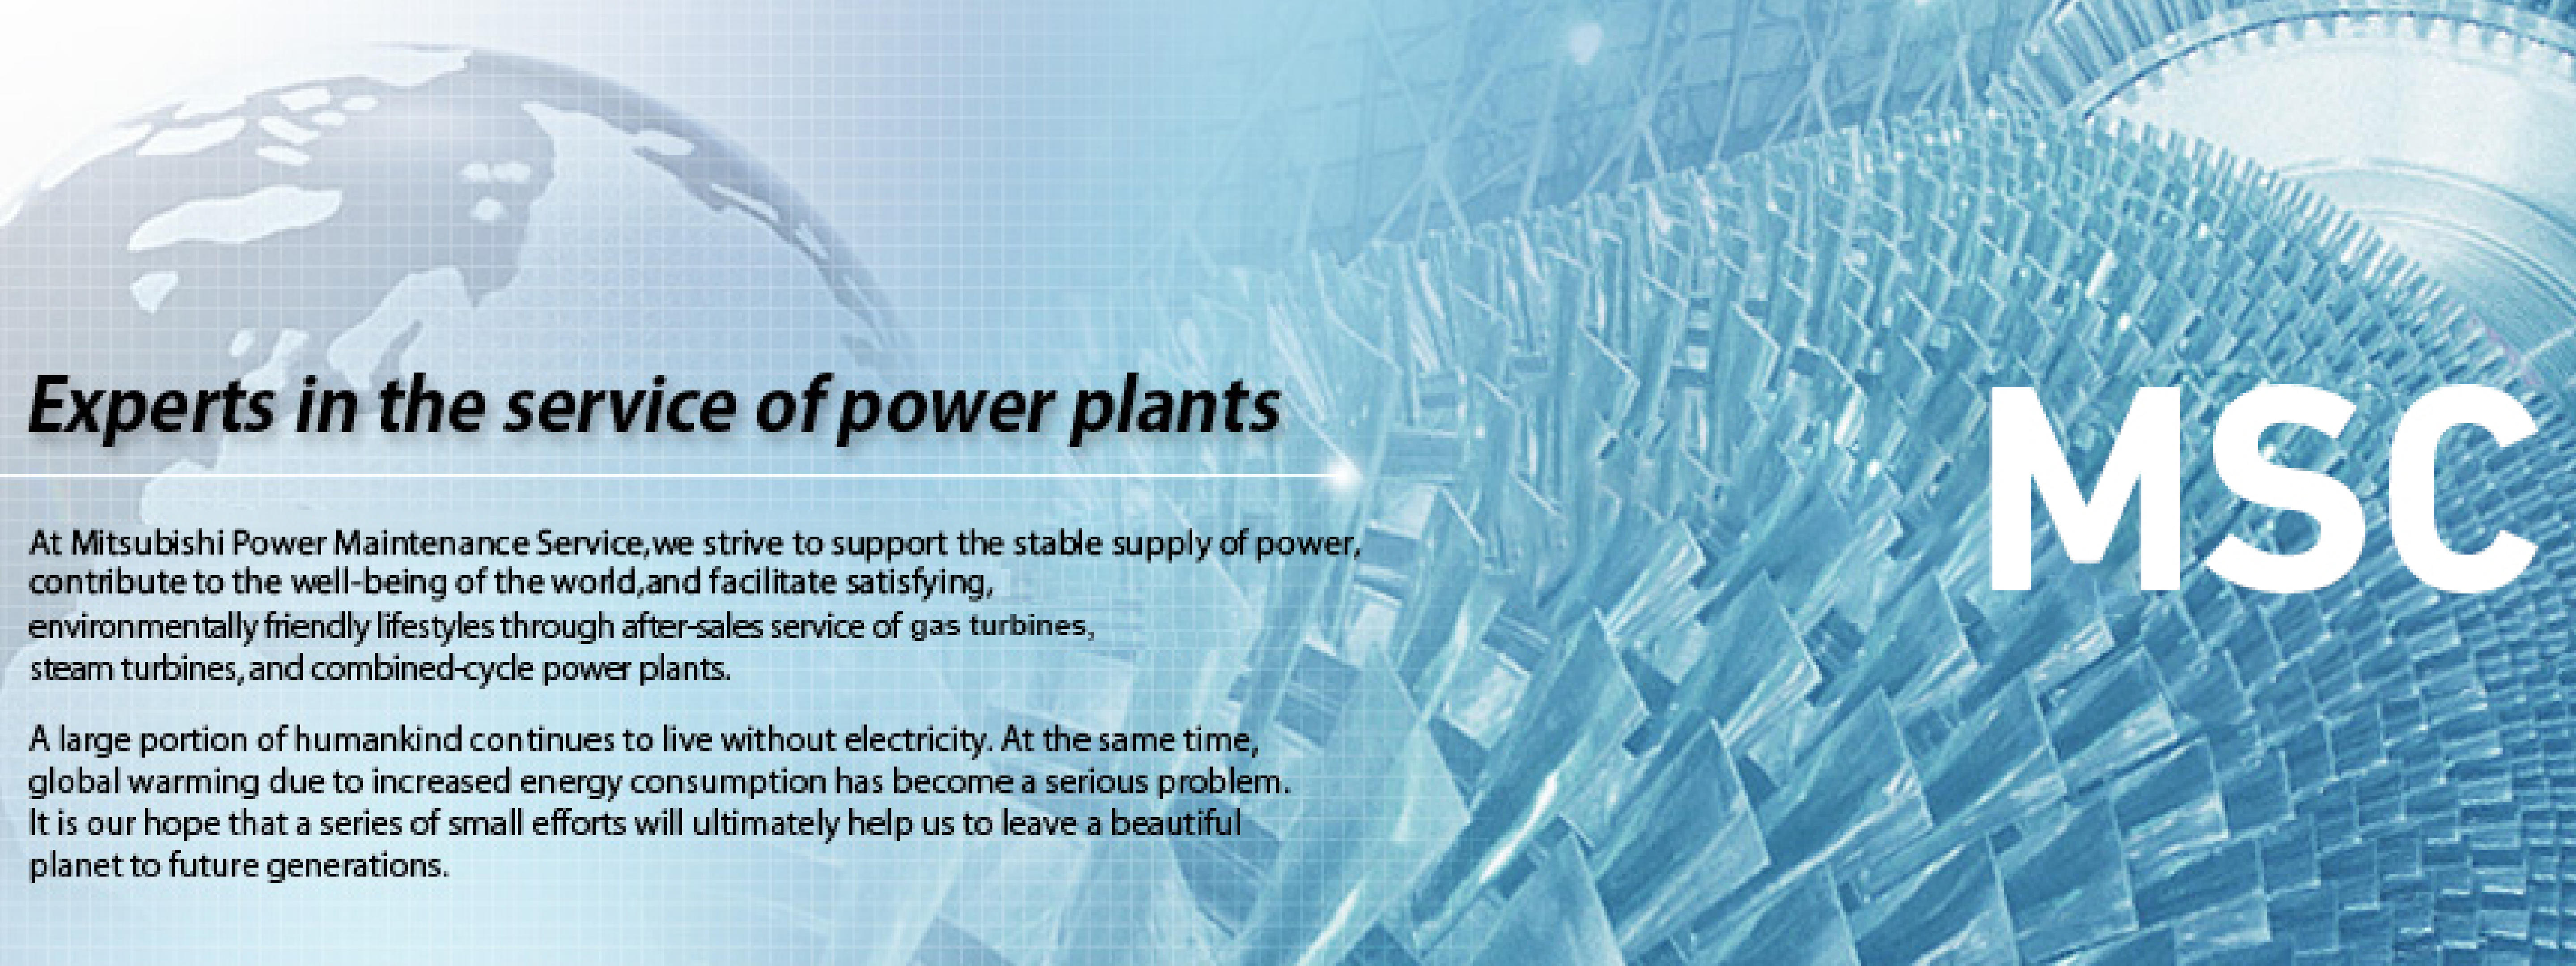 Experts in the service of power plants